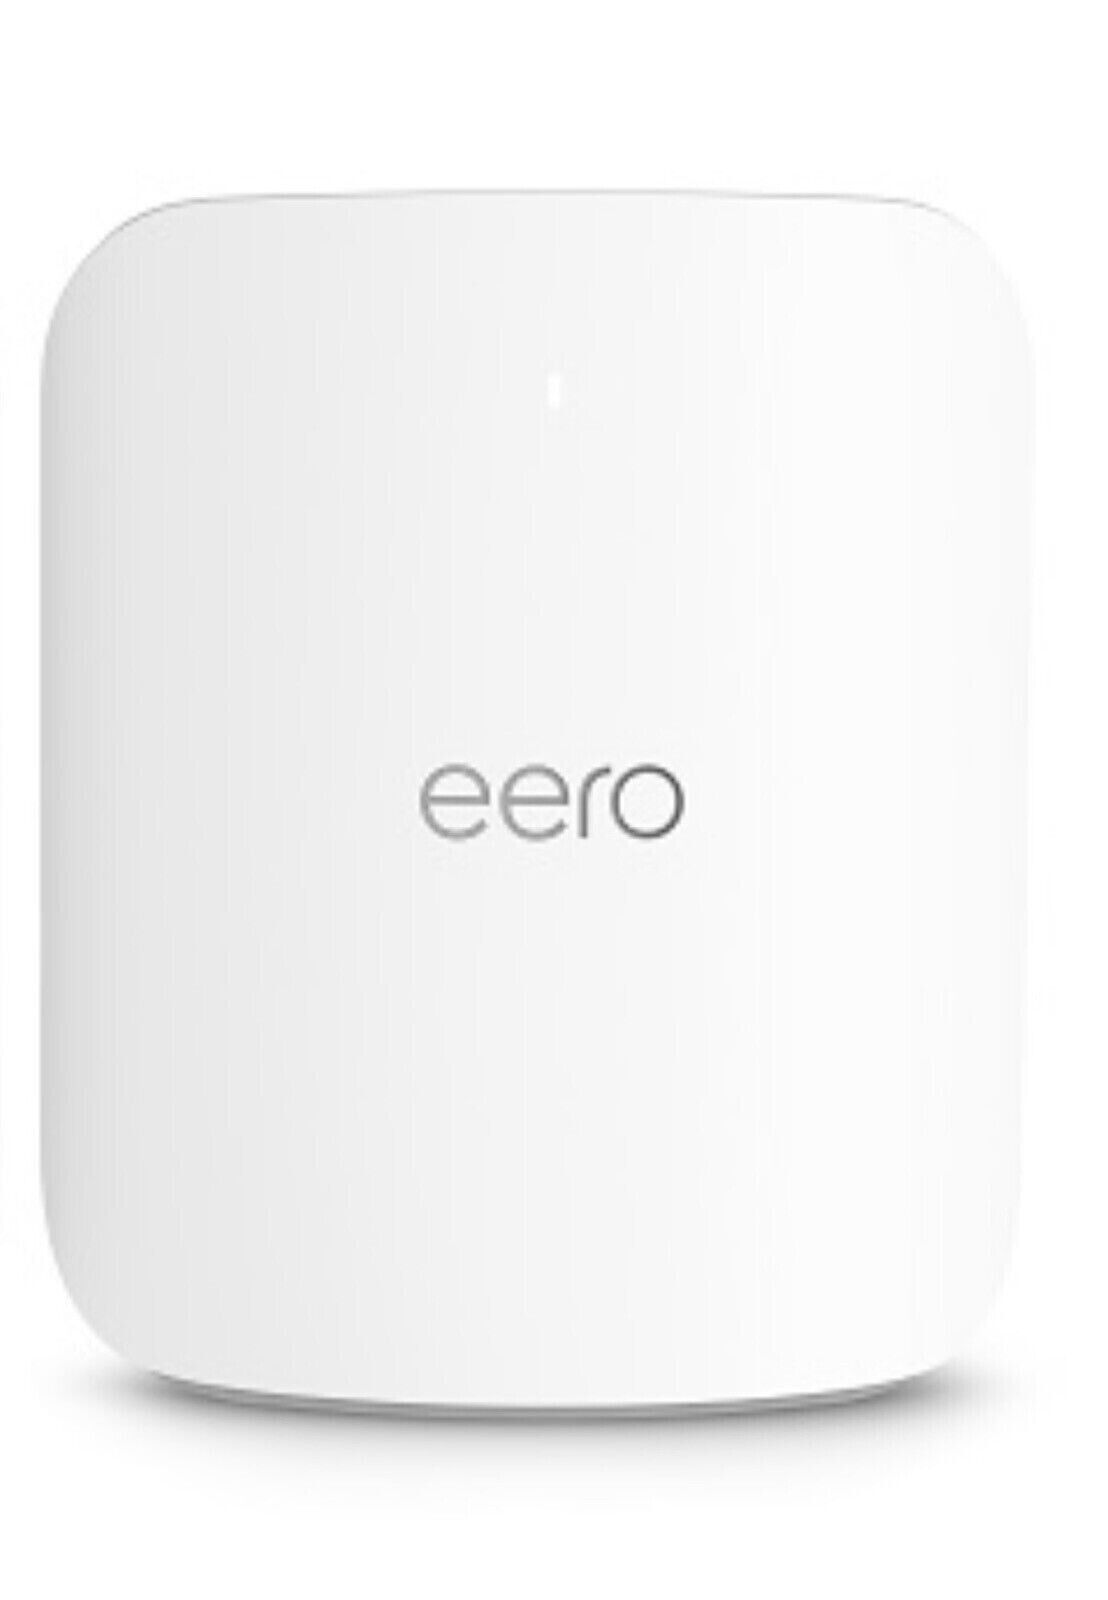 eero Max 7 Tri-Band Mesh Wi-Fi 7 Router - 10 Gbps Ethernet - White